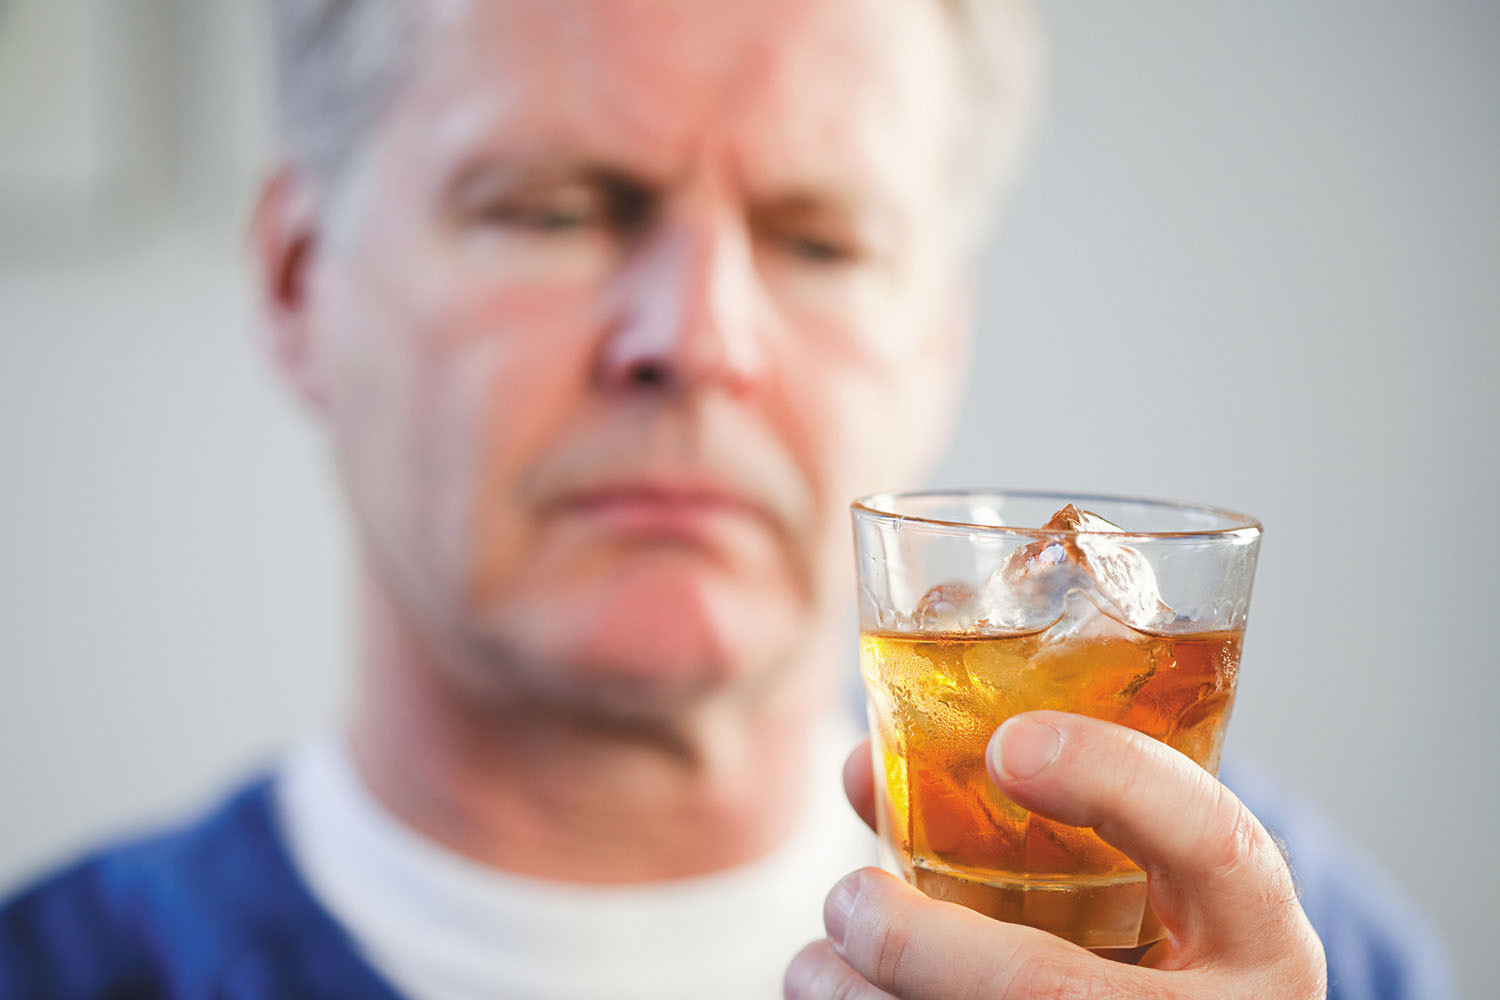 photo of a man holding a glass of liquor and looking at it skeptically